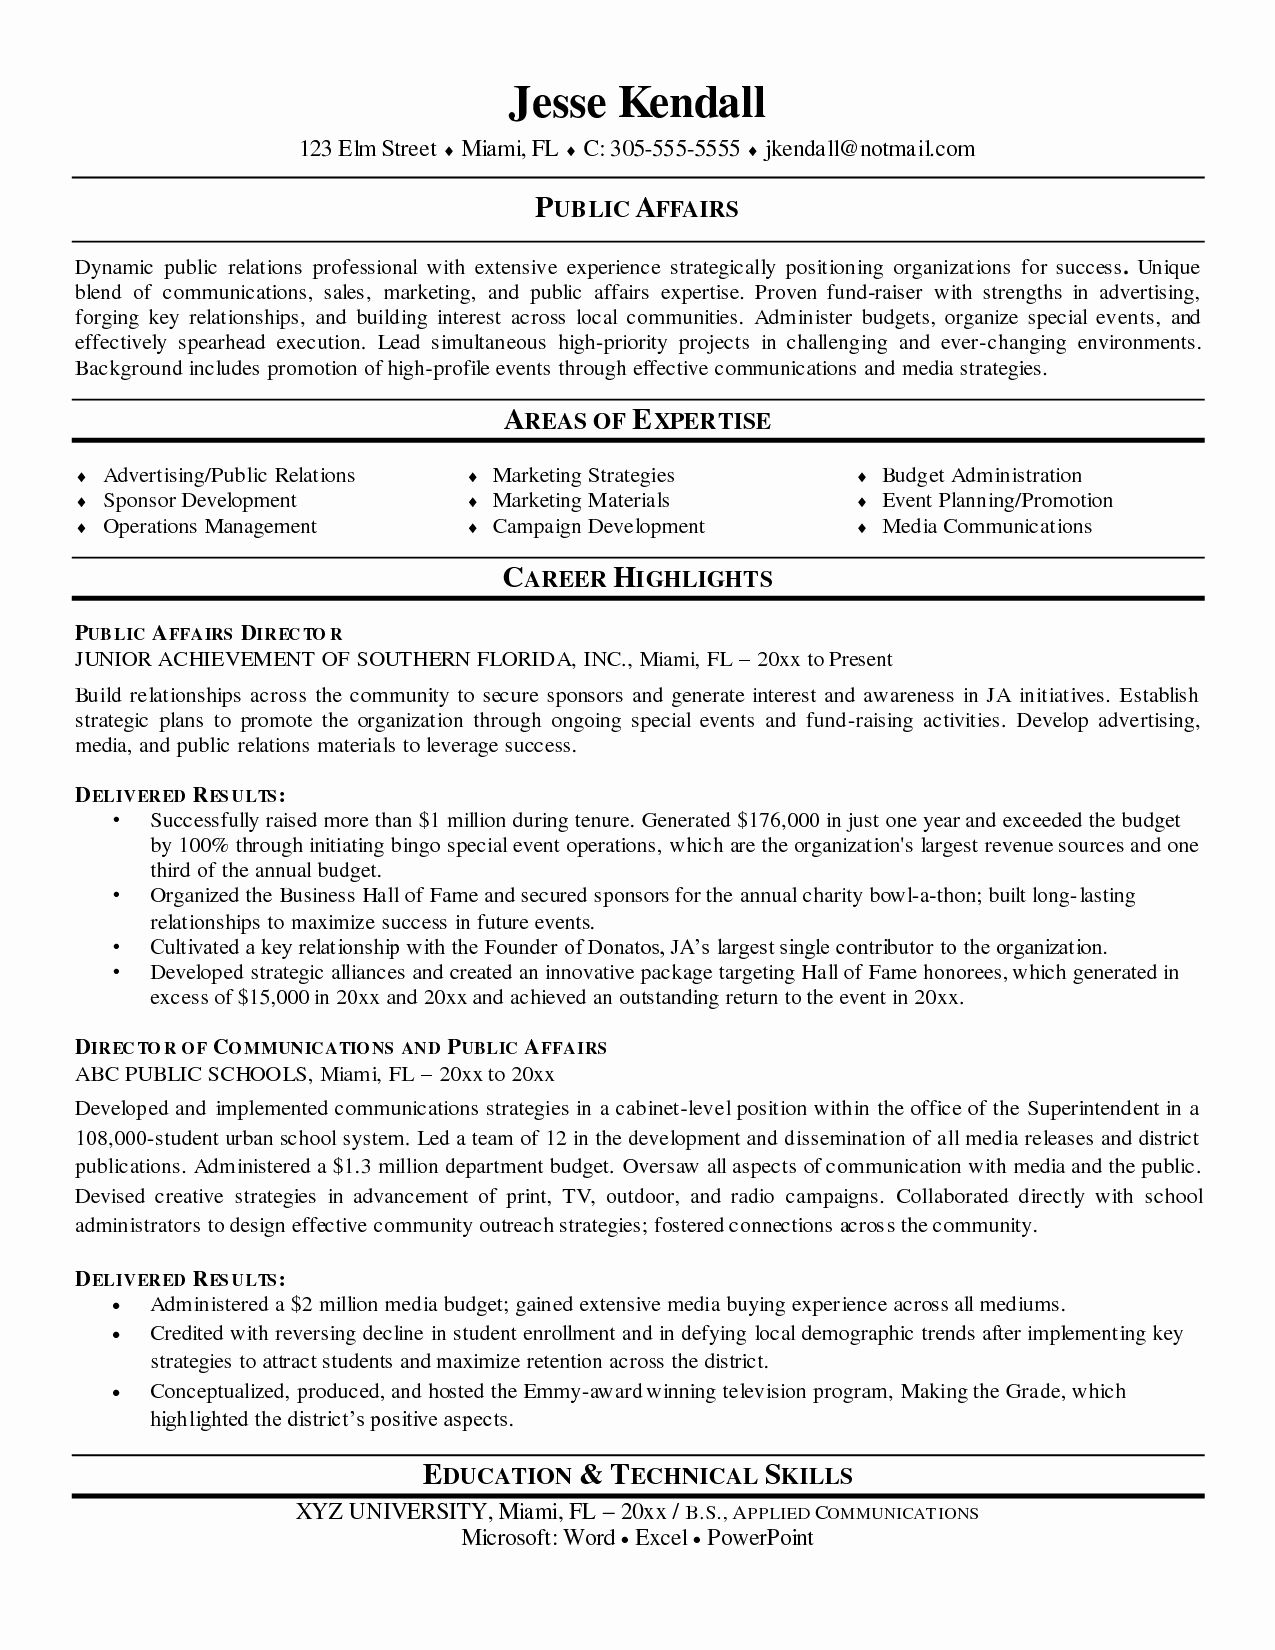 Public Relations Resume Example Best Of Public Affairs inside size 1275 X 1650